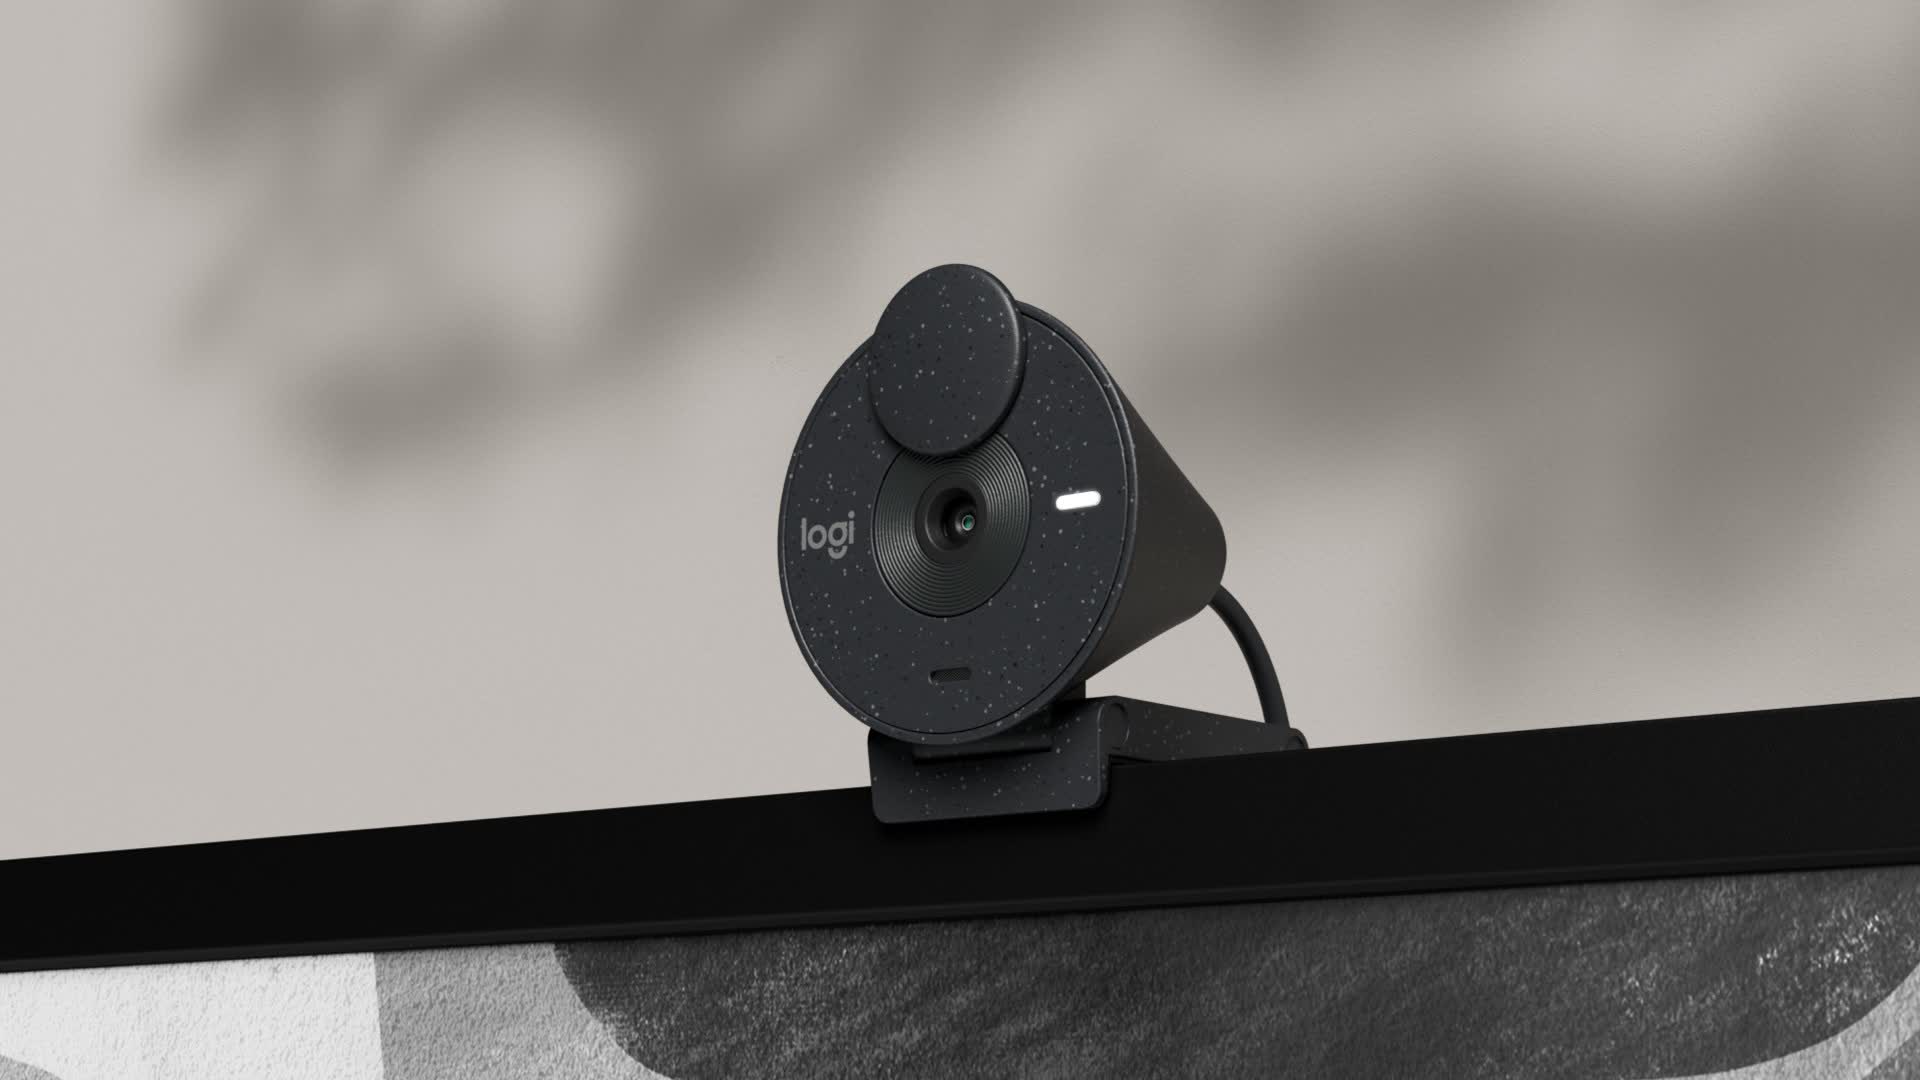 Logitech's latest webcam delivers 1080p HD and auto light correction on a budget